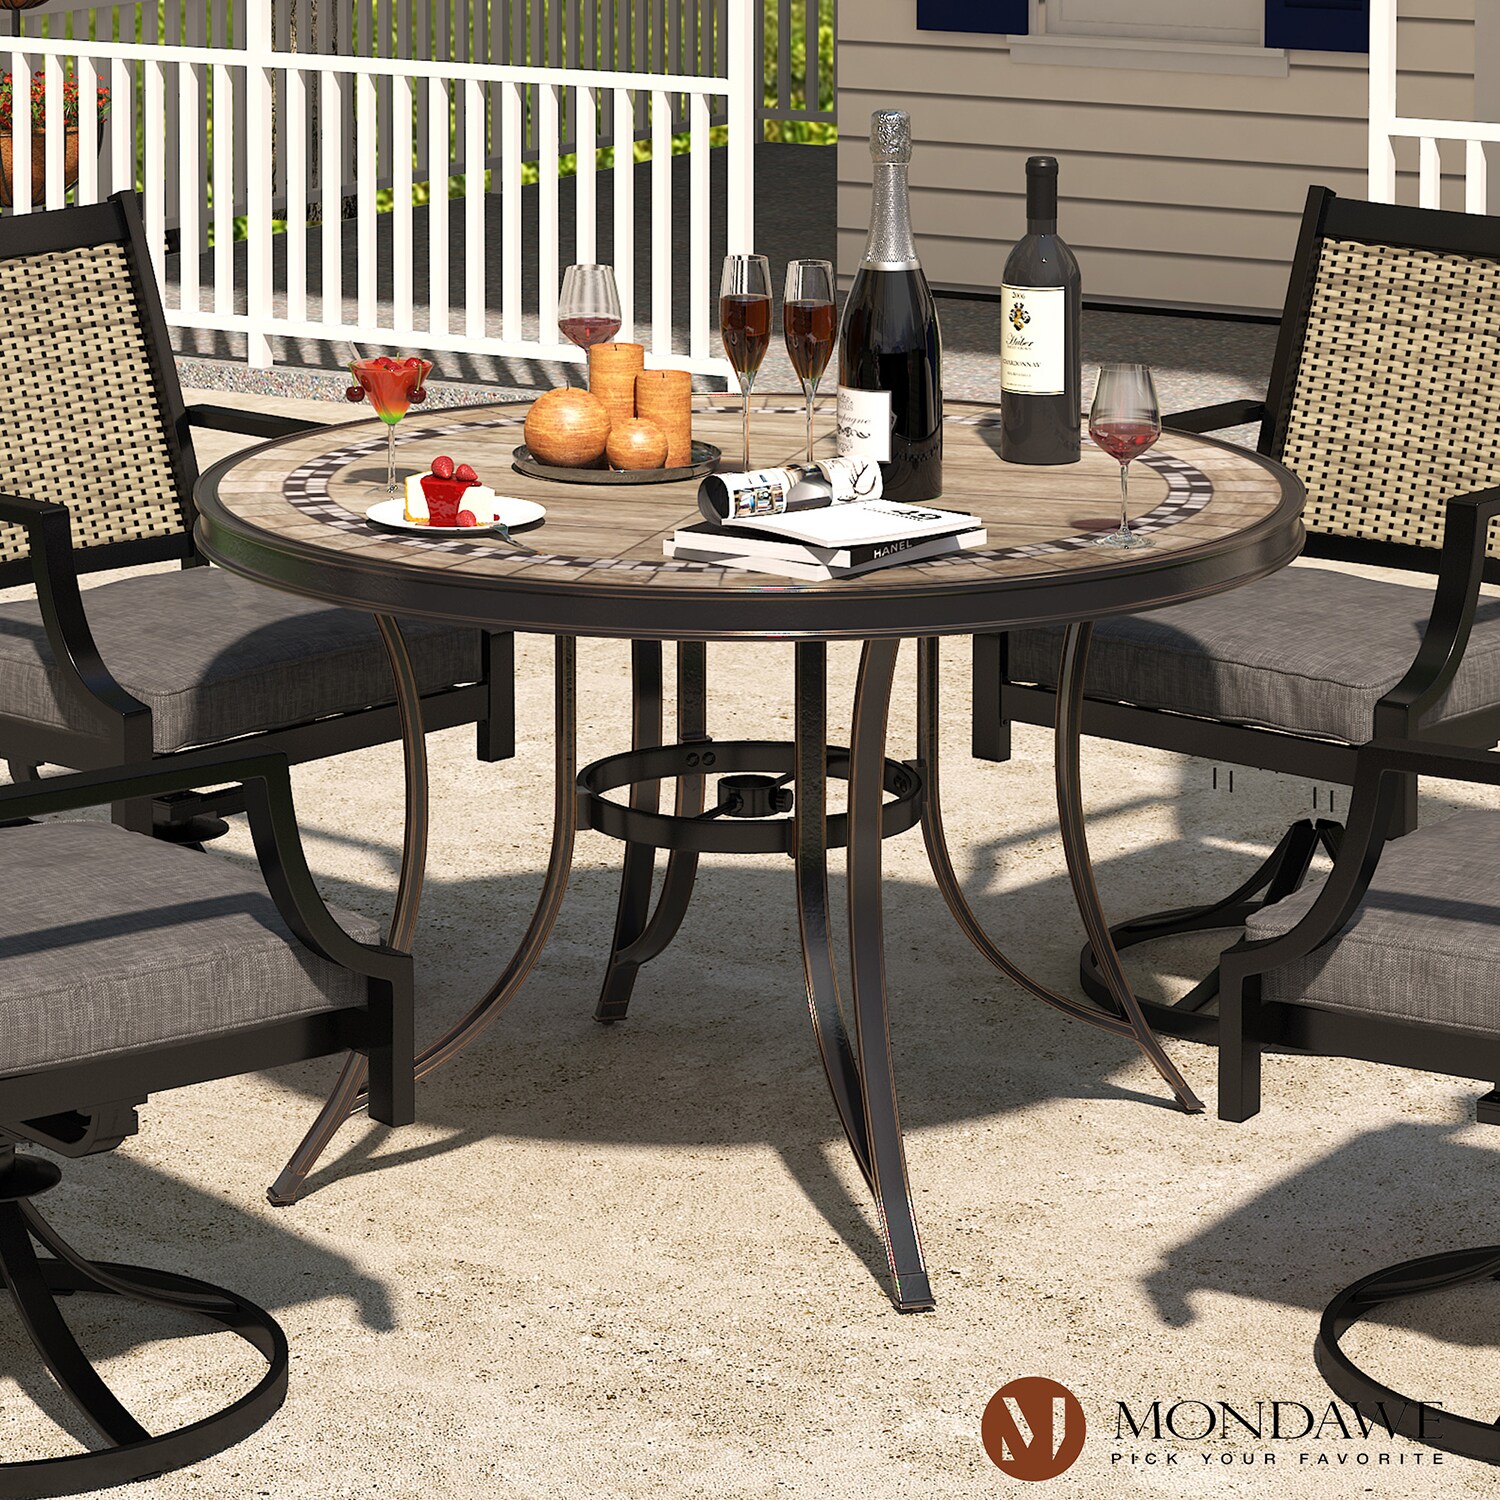 Mondawe Round Outdoor Dining Table 48 In W X 48 In L With Umbrella Hole